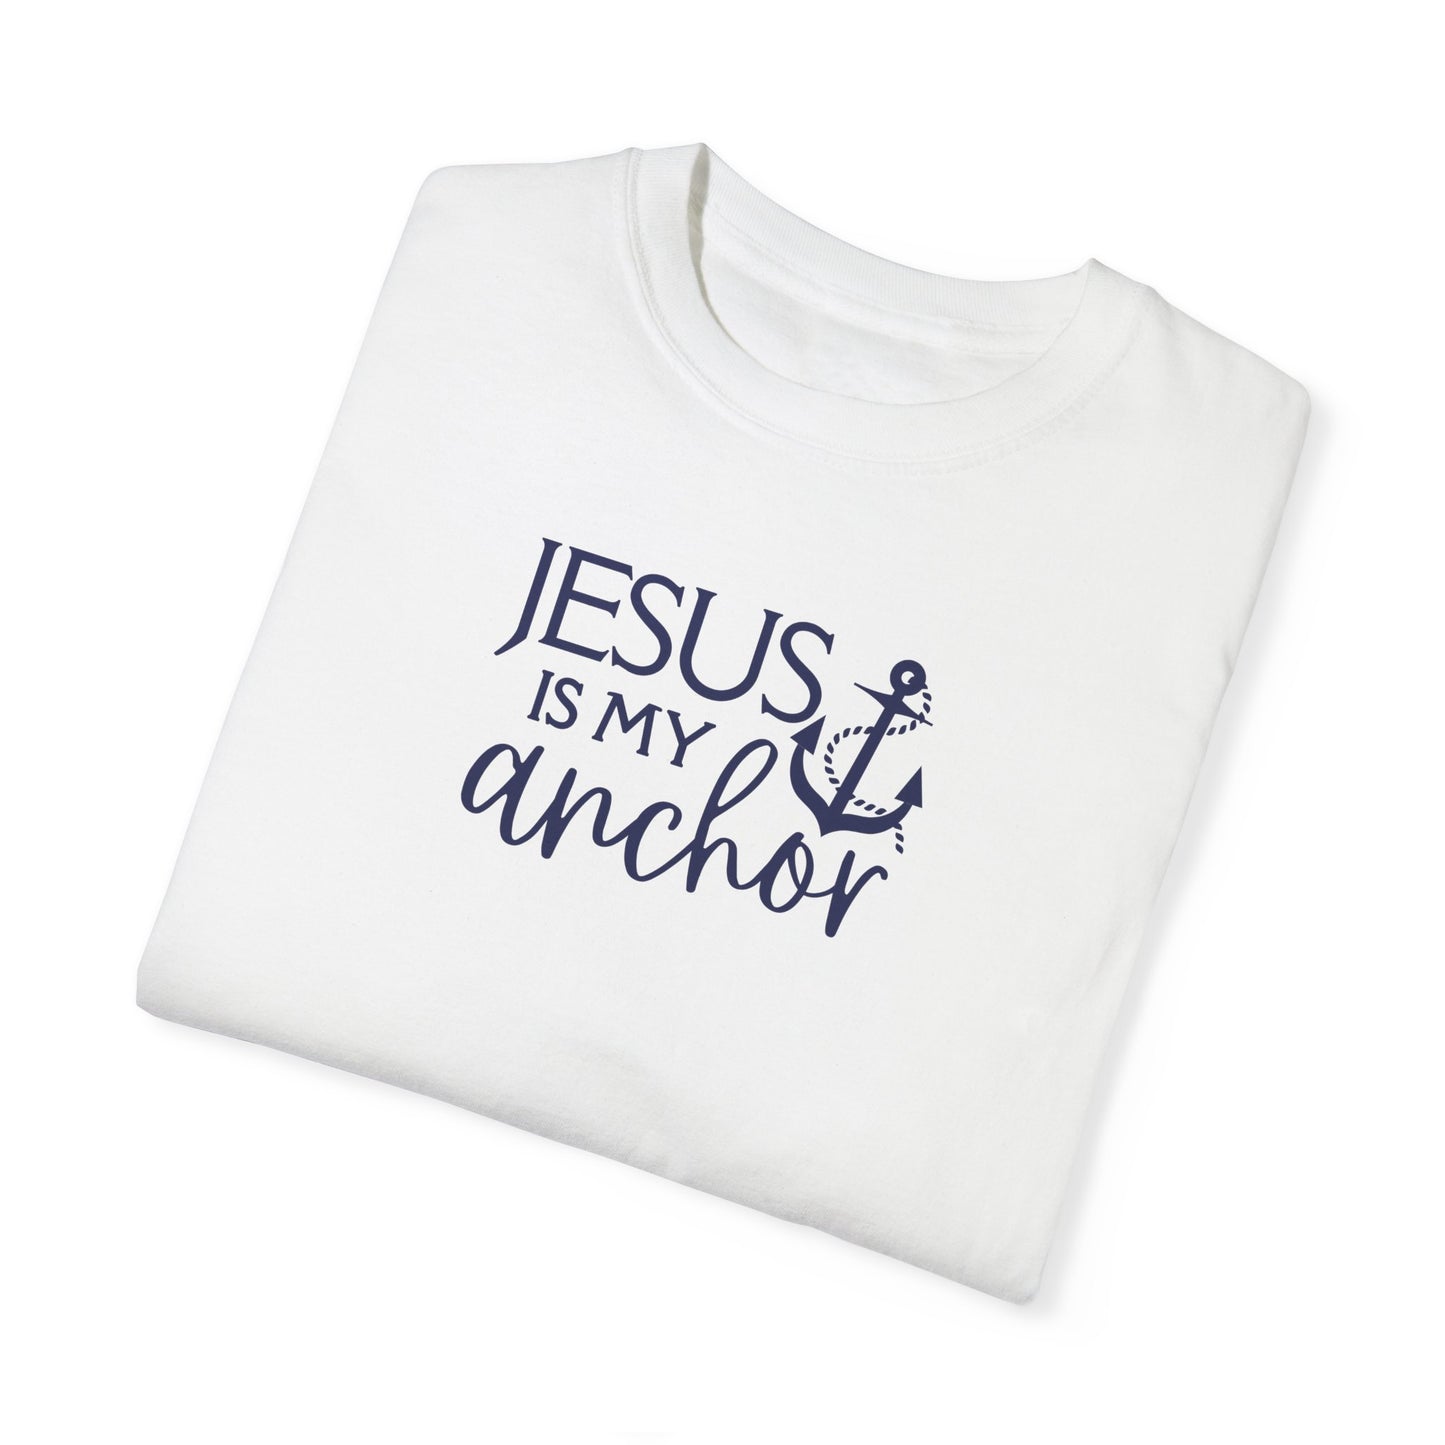 Jesus Is My Anchor T-shirt, Nautical Tee For Women, Faith Based Apparel For Women